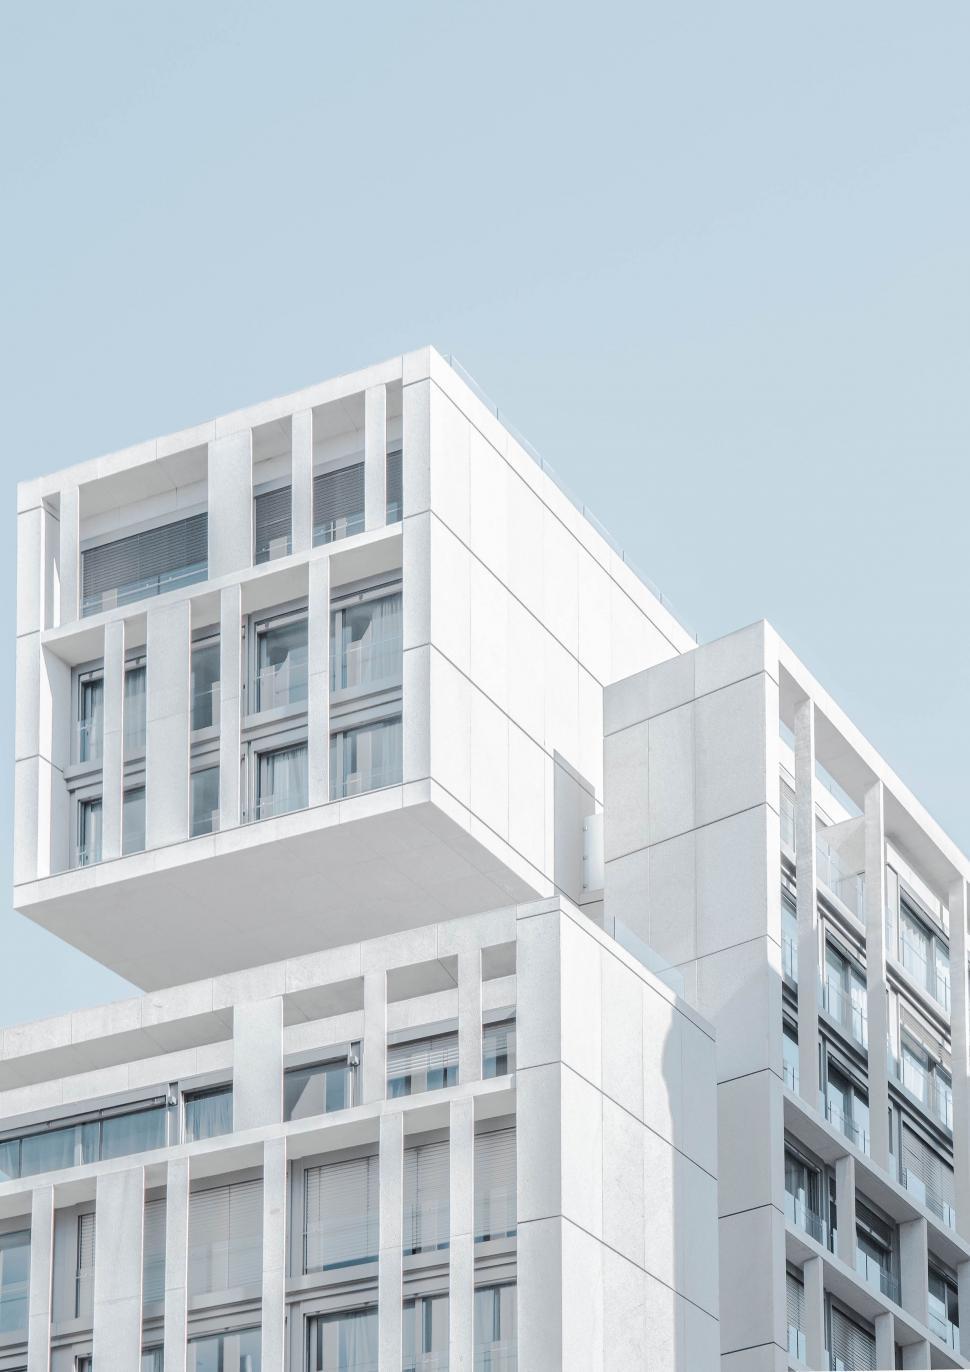 Free Image of Modern White Building With Windows and Balconies 